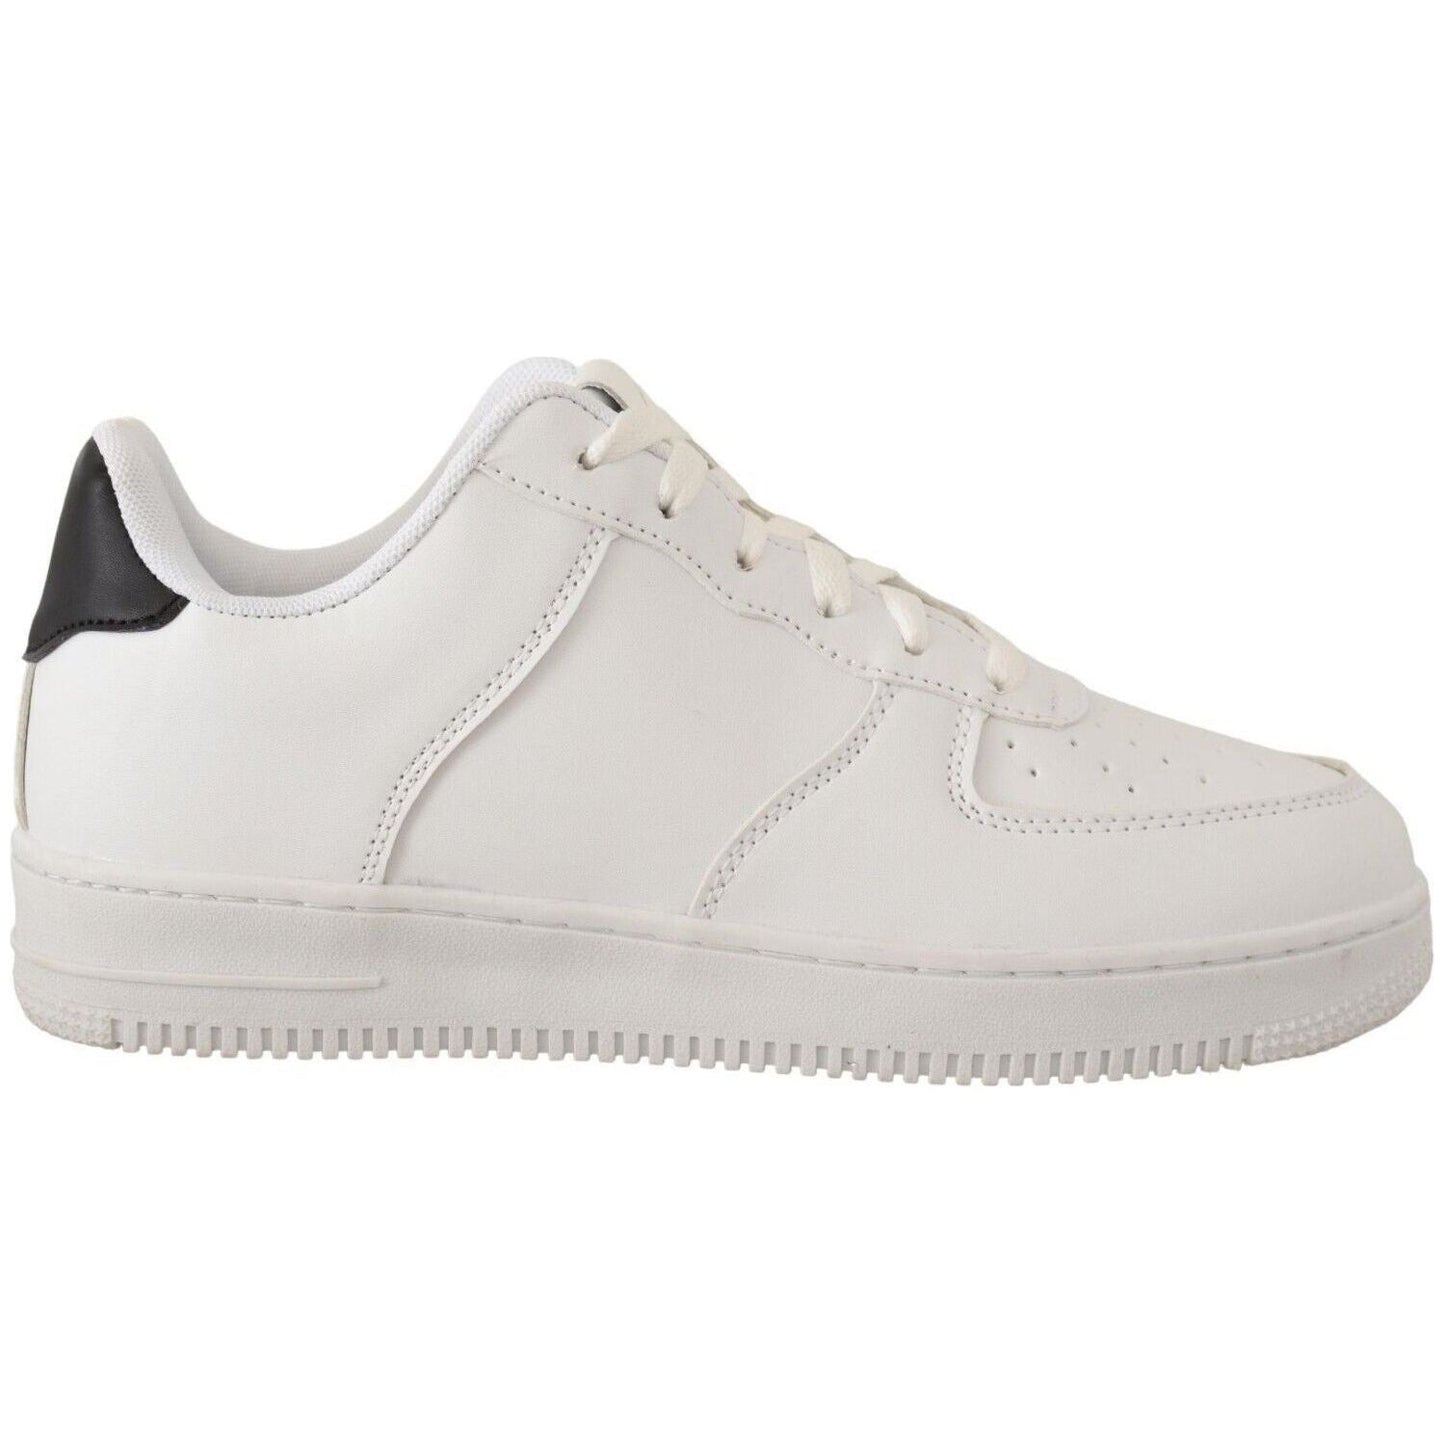 SIGNS Chic White Leather Low Top Sneakers white-leather-perforated-lace-up-sneakers-casual-men-shoes MAN SNEAKERS s-l1600-185-897401df-635.jpg